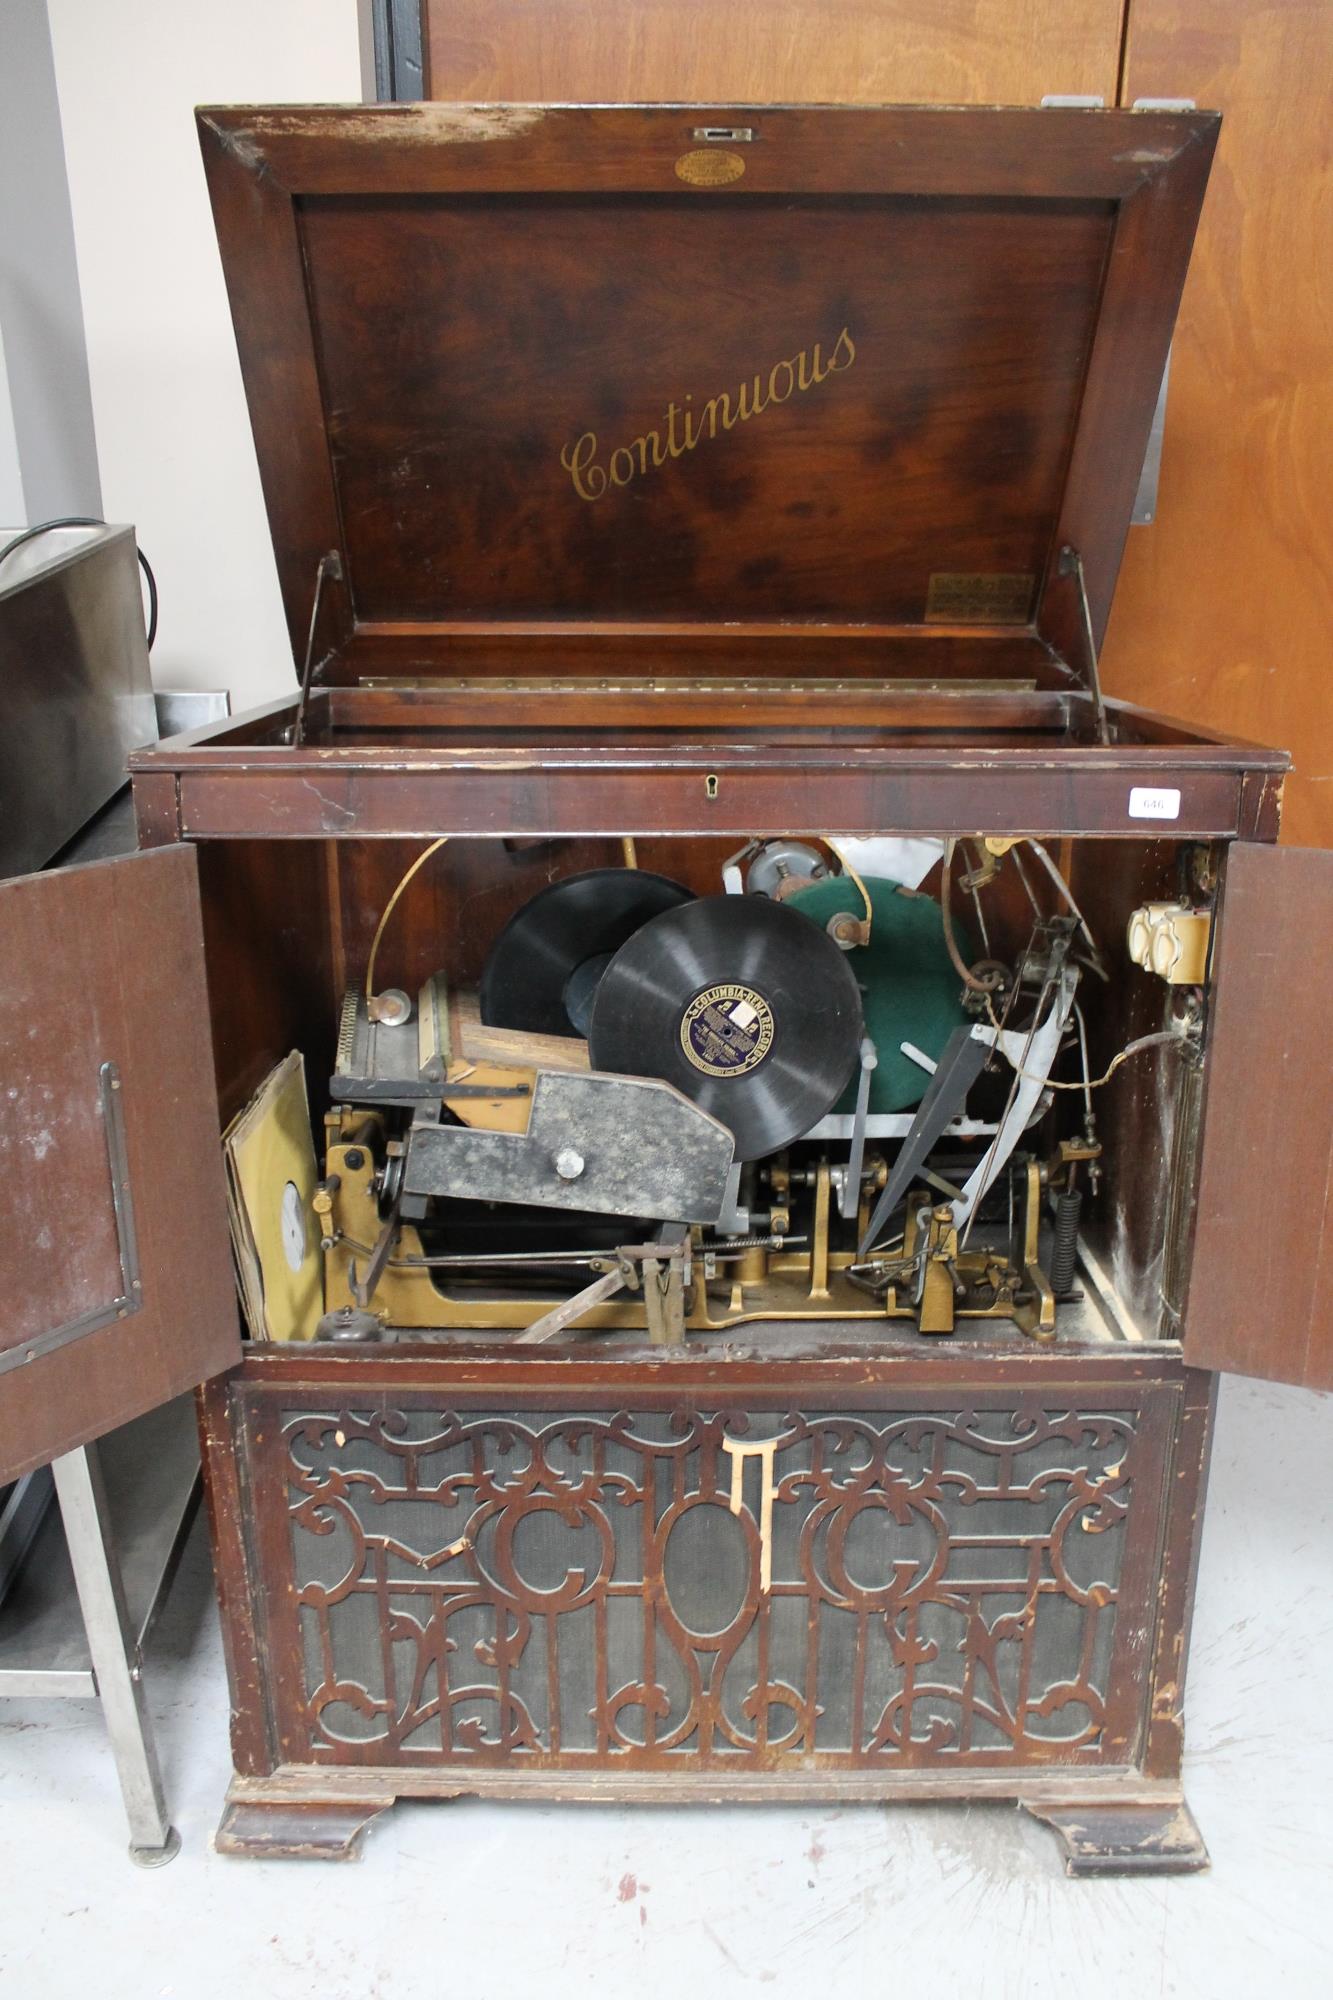 An early 20th century mahogany cased Continuous gramophone manufactured by Continuous Gramophones